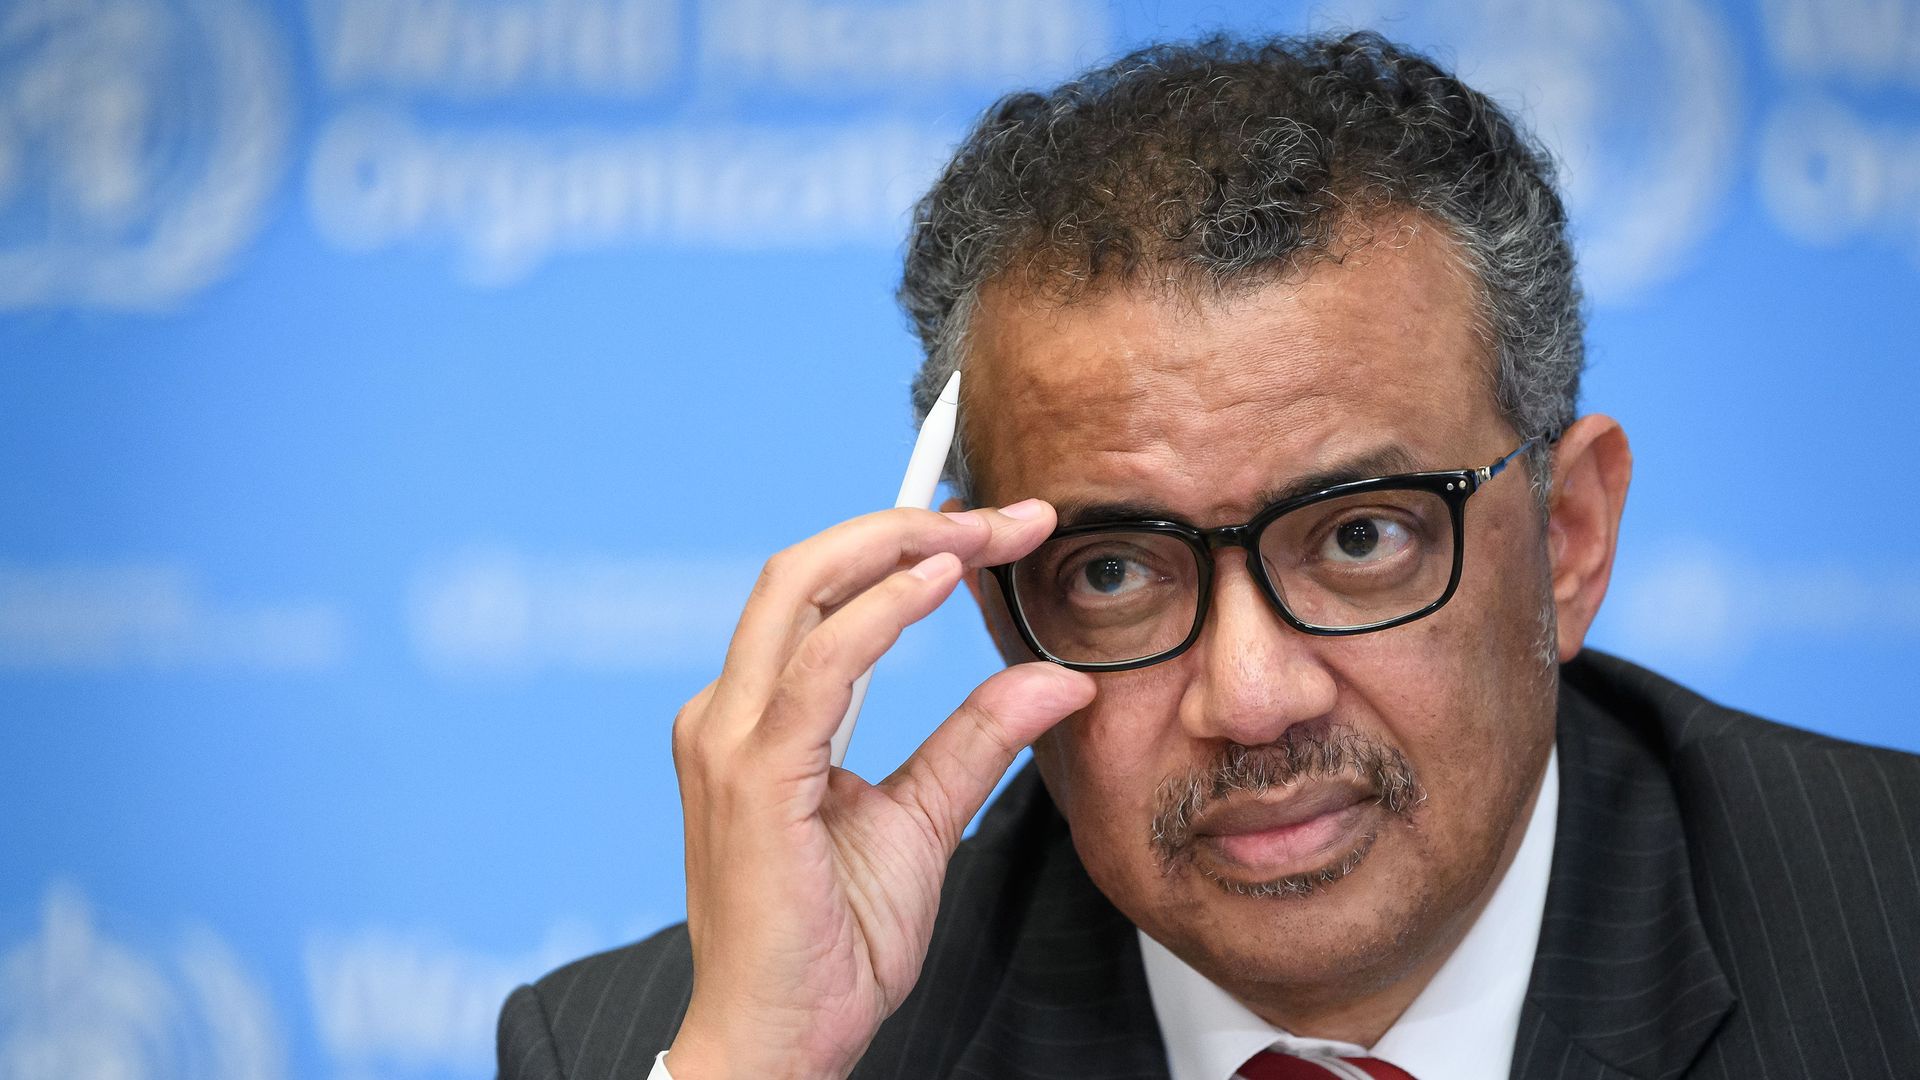 World Health Organization (WHO) Director-General Tedros Adhanom Ghebreyesus attending a press briefing on COVID-19 at the WHO headquarters in Geneva.